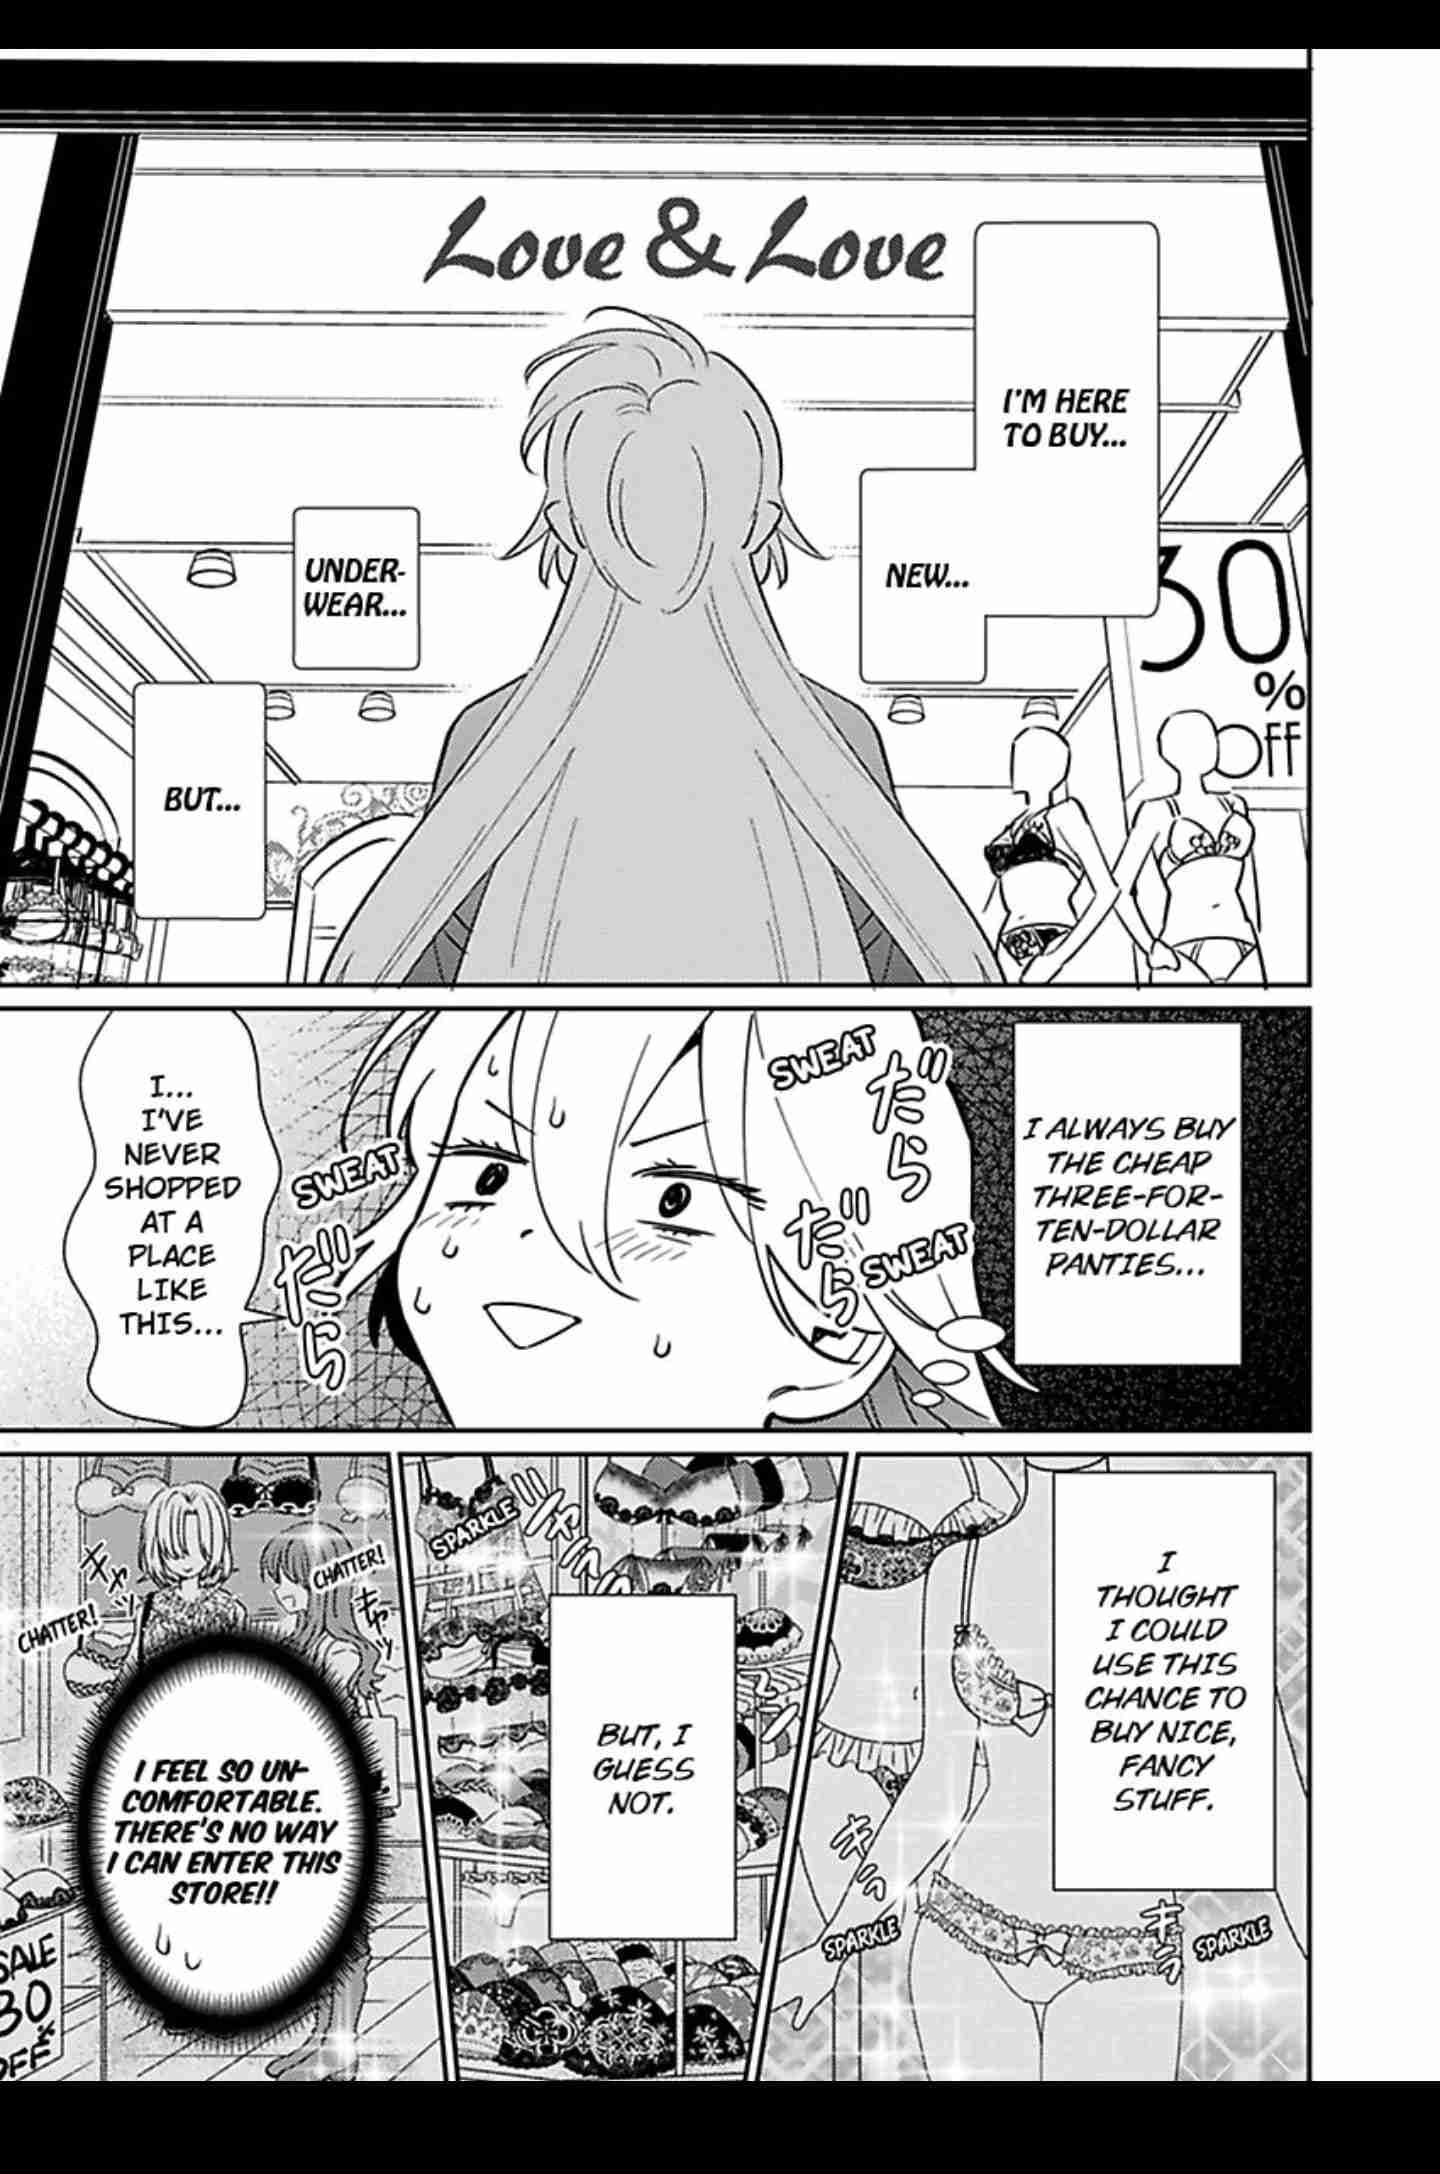 That Unexpected Side to my Childhood Friend -Watch Out for the Animal in Him! Vol.1 Ch.9